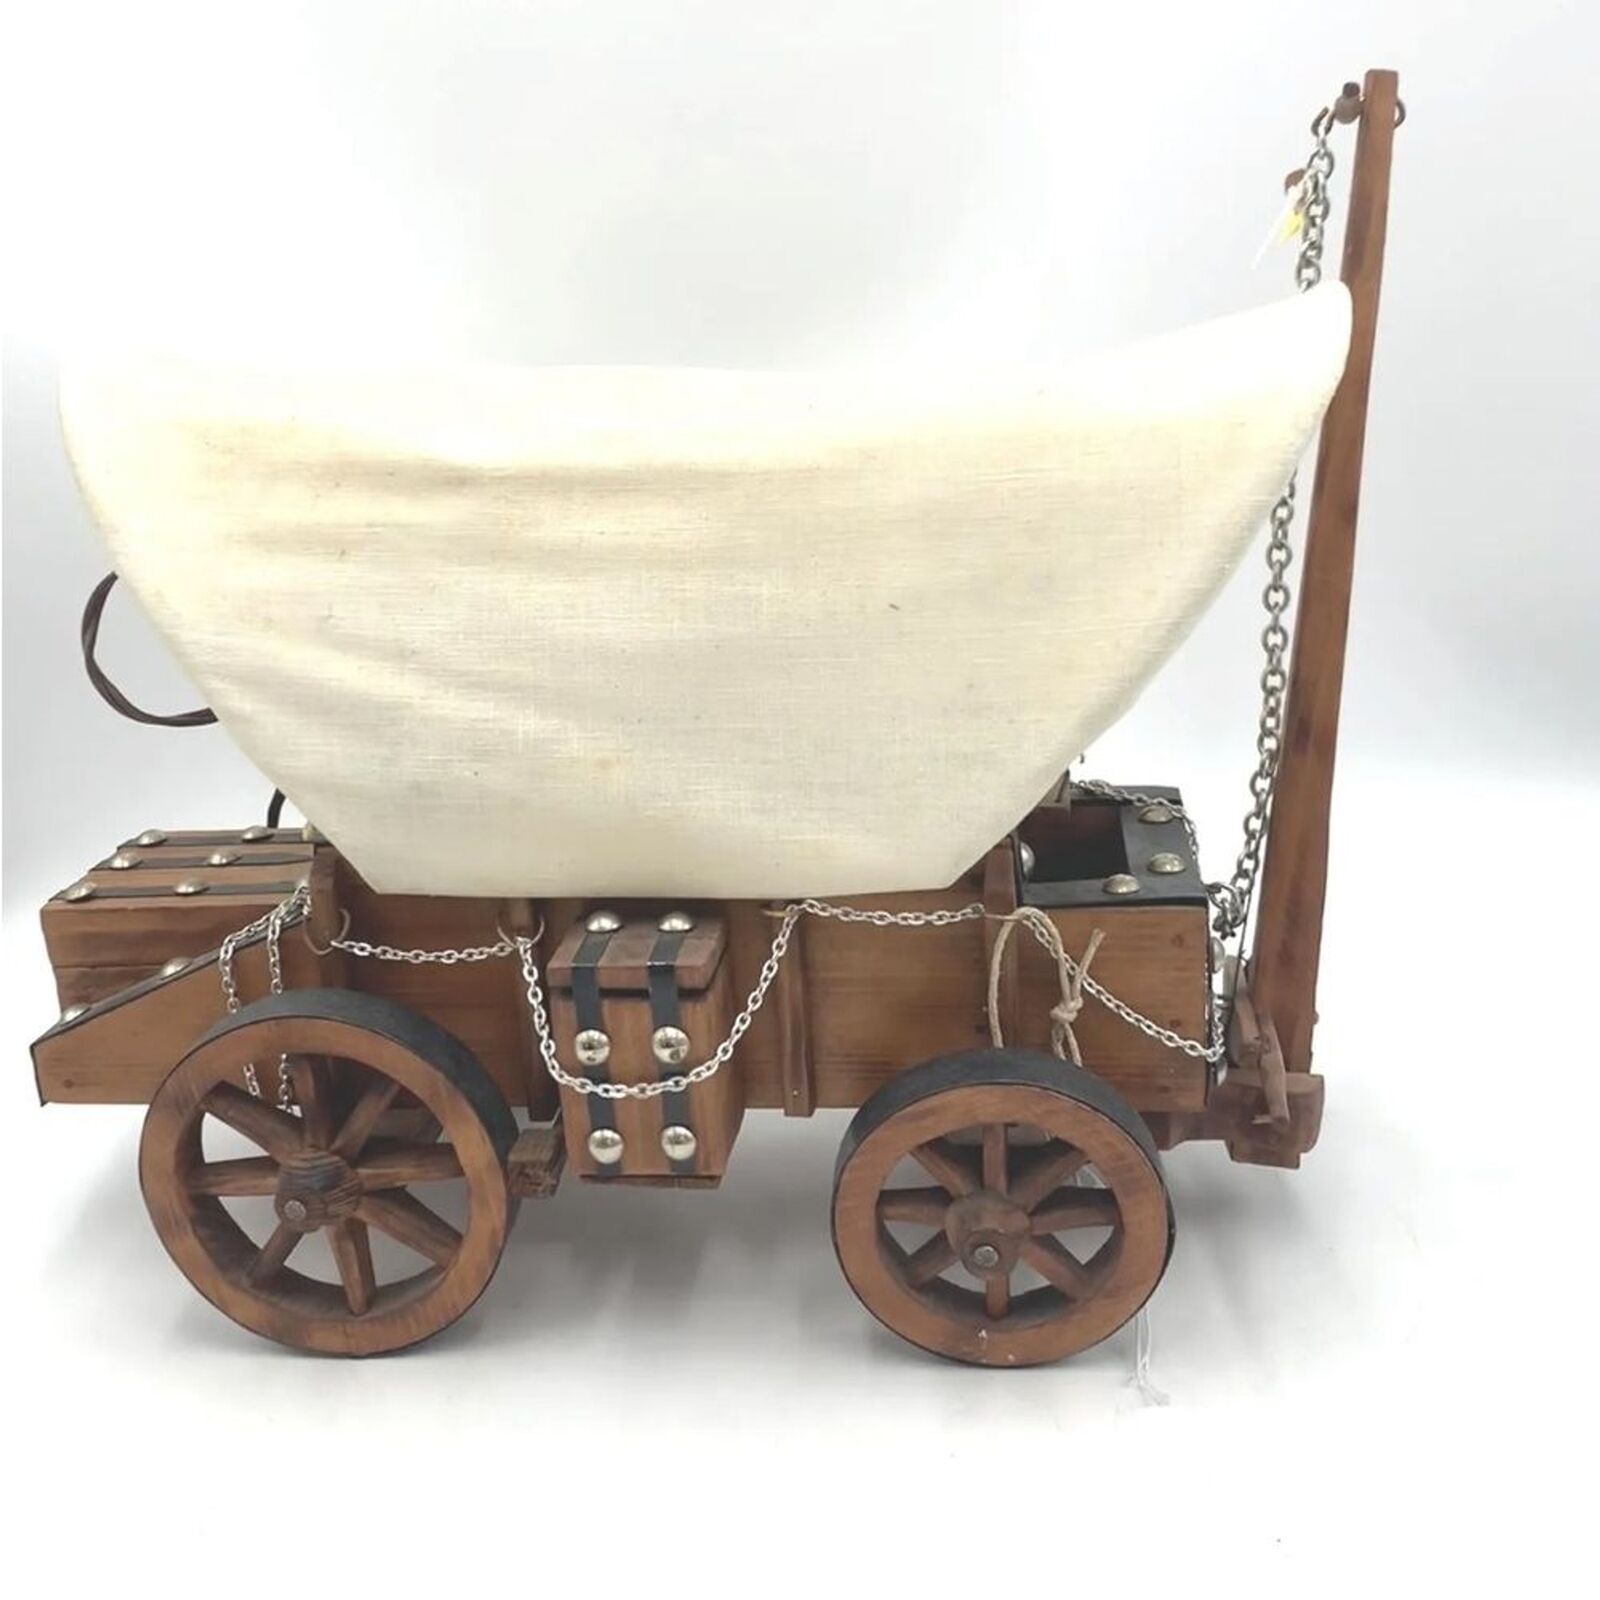 Vintage Handmade By JH Jackson Bran DN Miss Wooden Covered Wagon Night Lamp